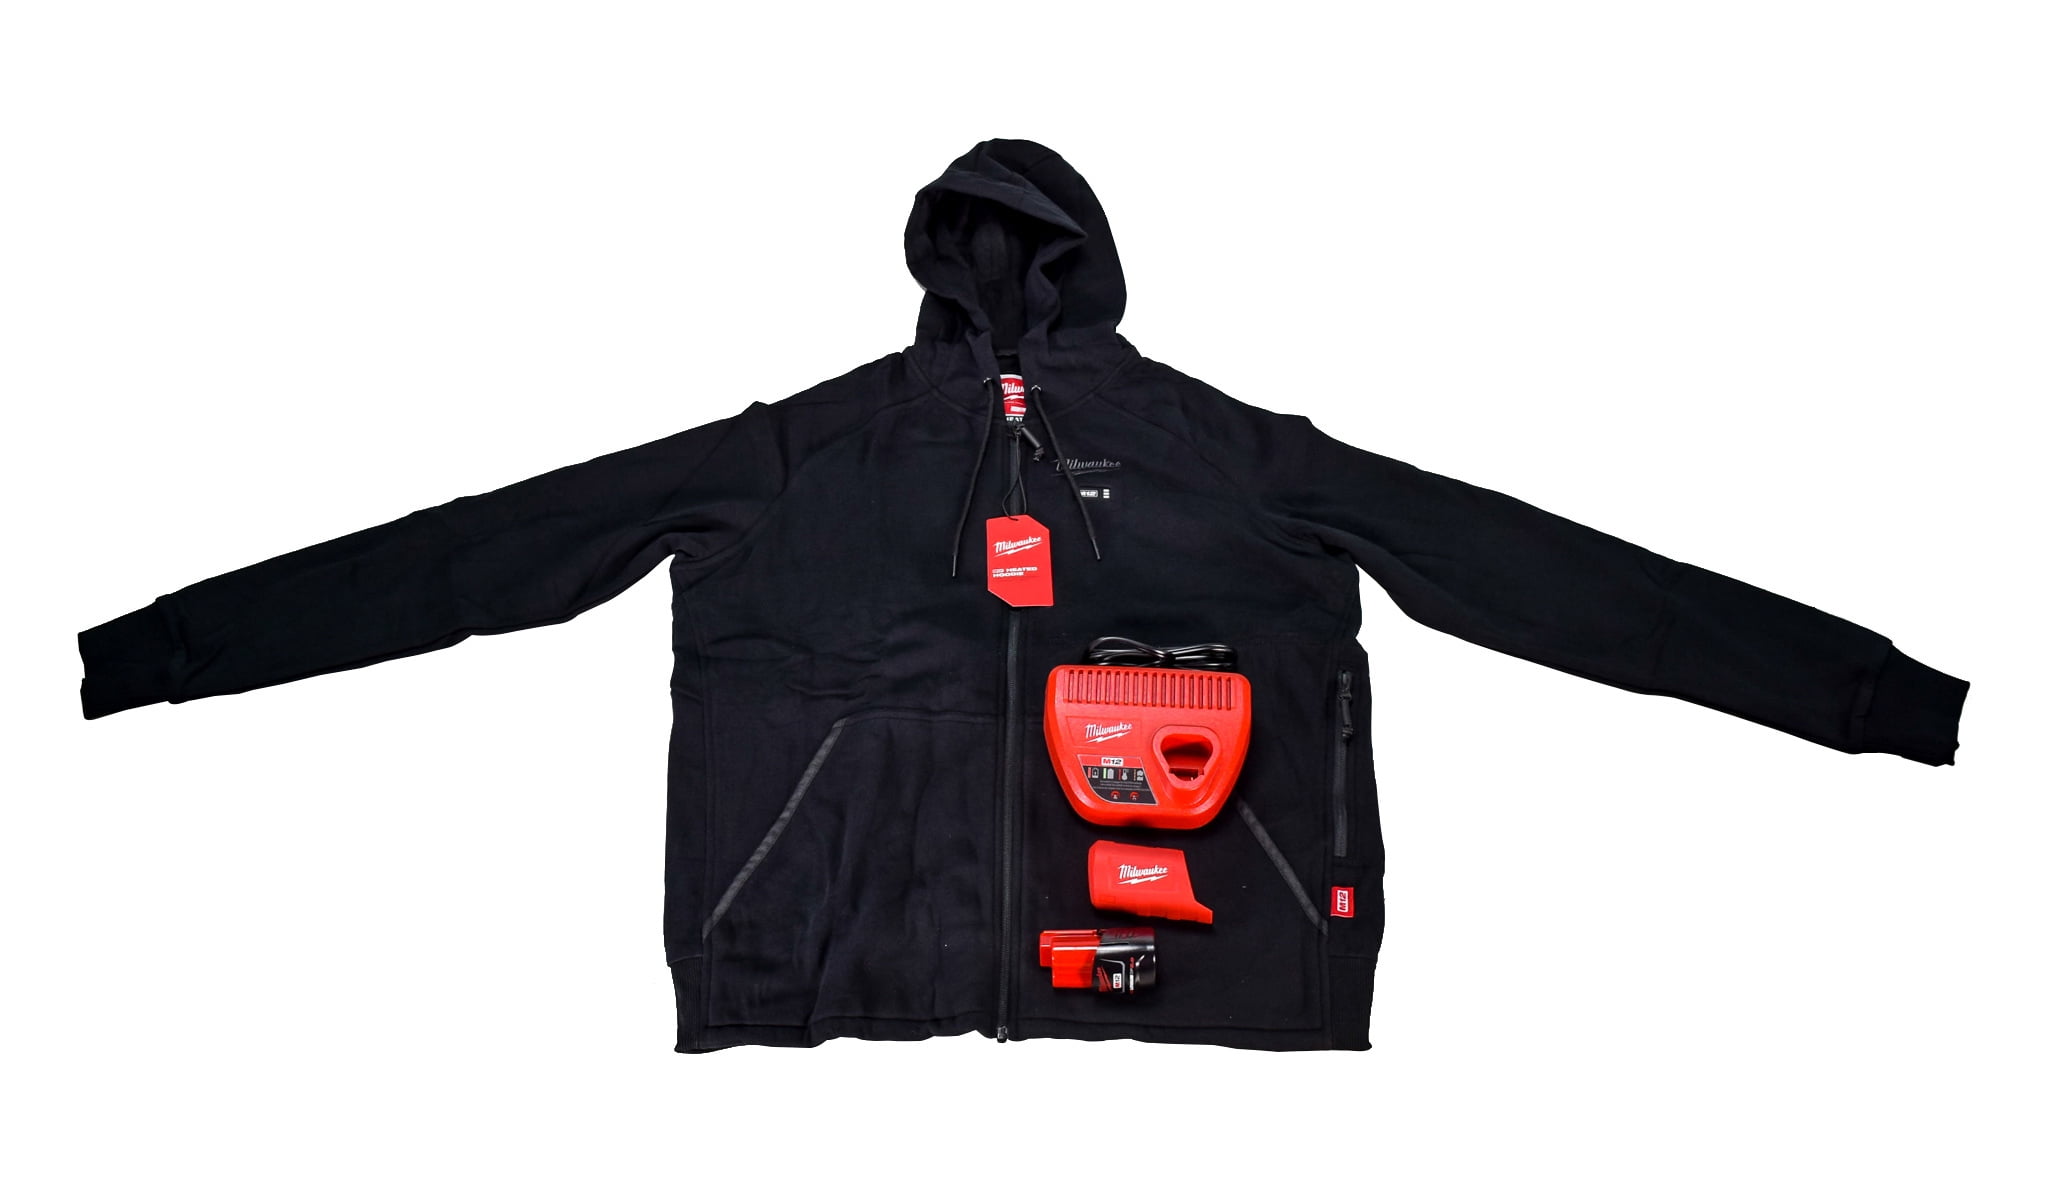 Milwaukee 306B-213X 12V Heated Hoodie Kit Black (3XLarge) with 2.0Ah Lithium  Ion Battery  Charger